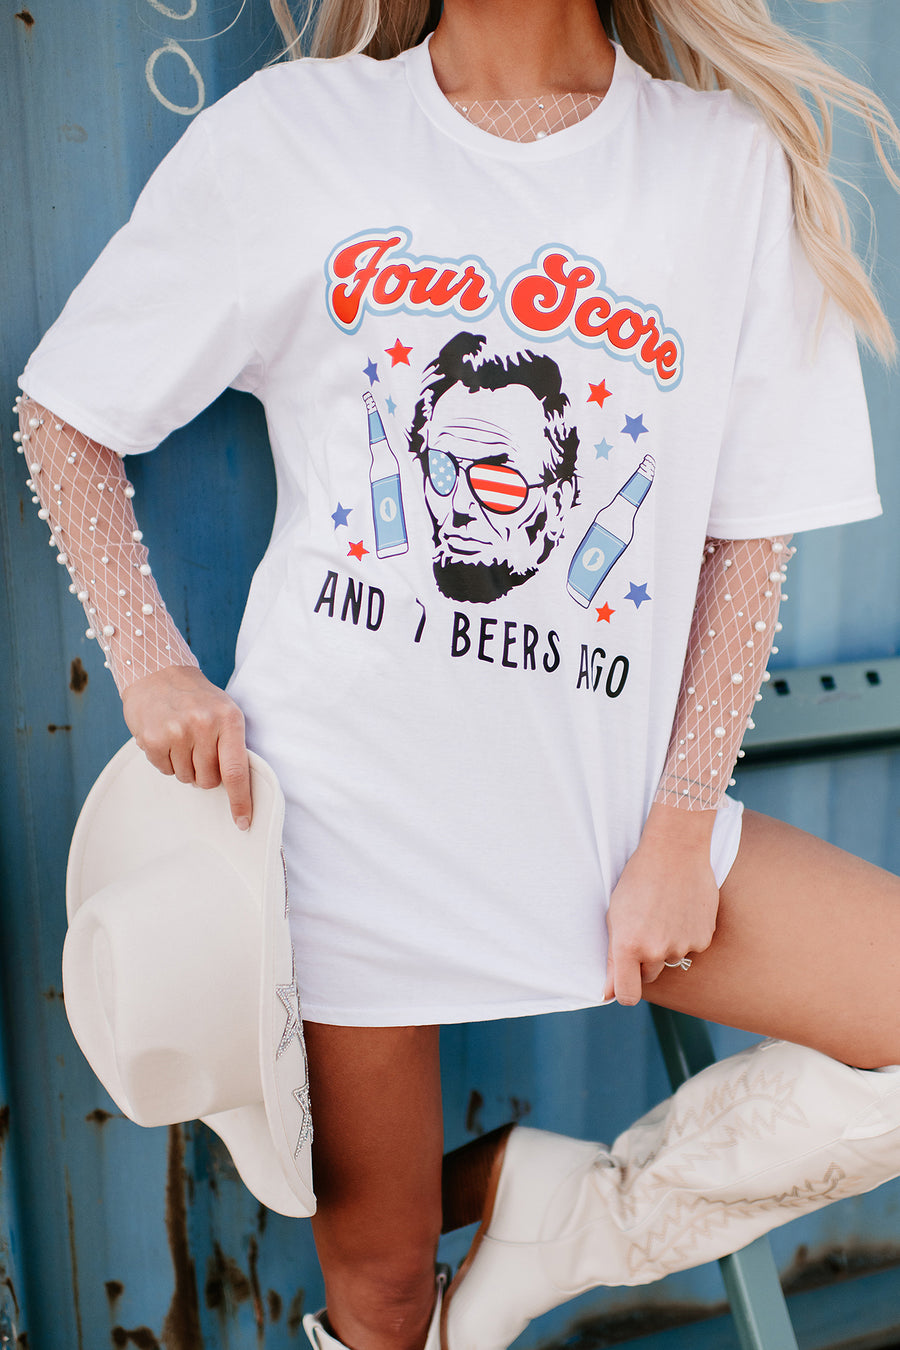 "Four Score And 7 Beers Ago" Graphic T-Shirt (White) - Print On Demand - NanaMacs